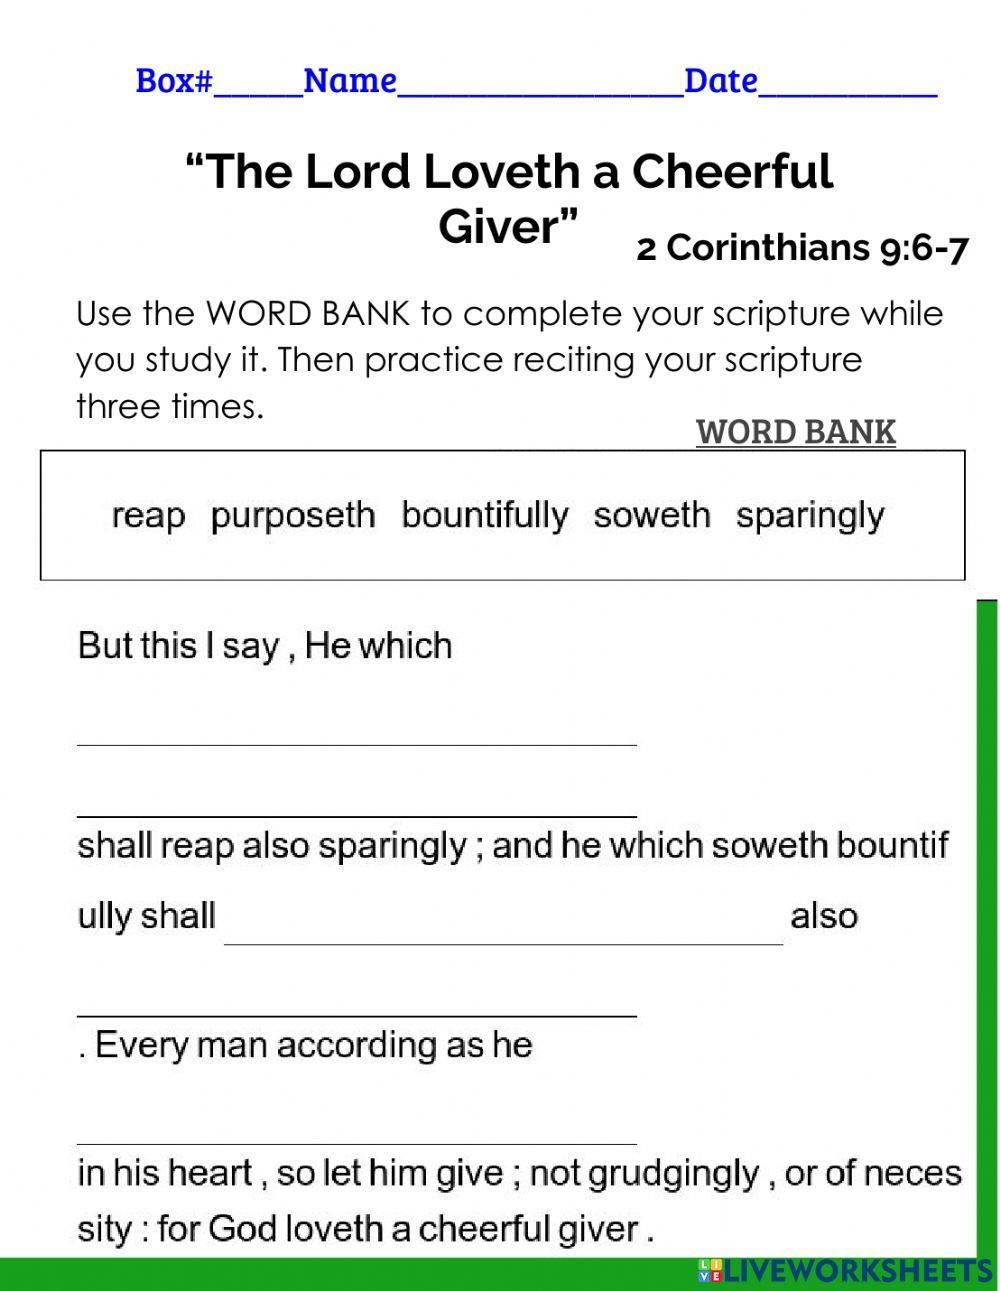 The Lord Loveth Part 1